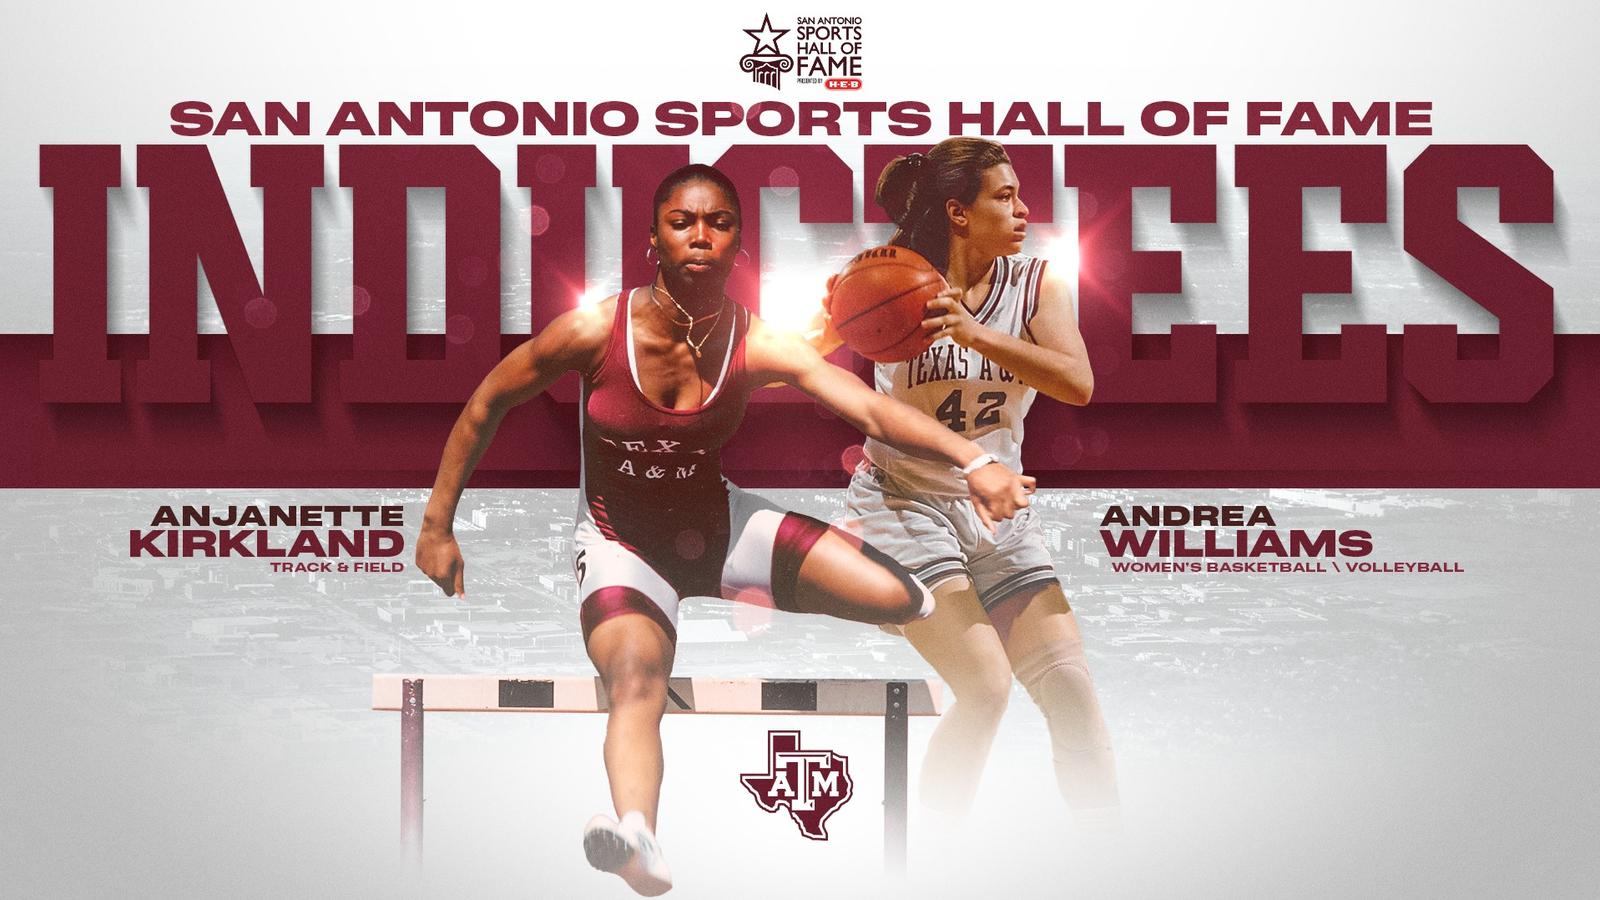 Record-Breaking Athletes and Visionaries: Texas A&M Legends Anjanette Kirkland and Andrea Williams Inducted into San Antonio Sports Hall of Fame”.